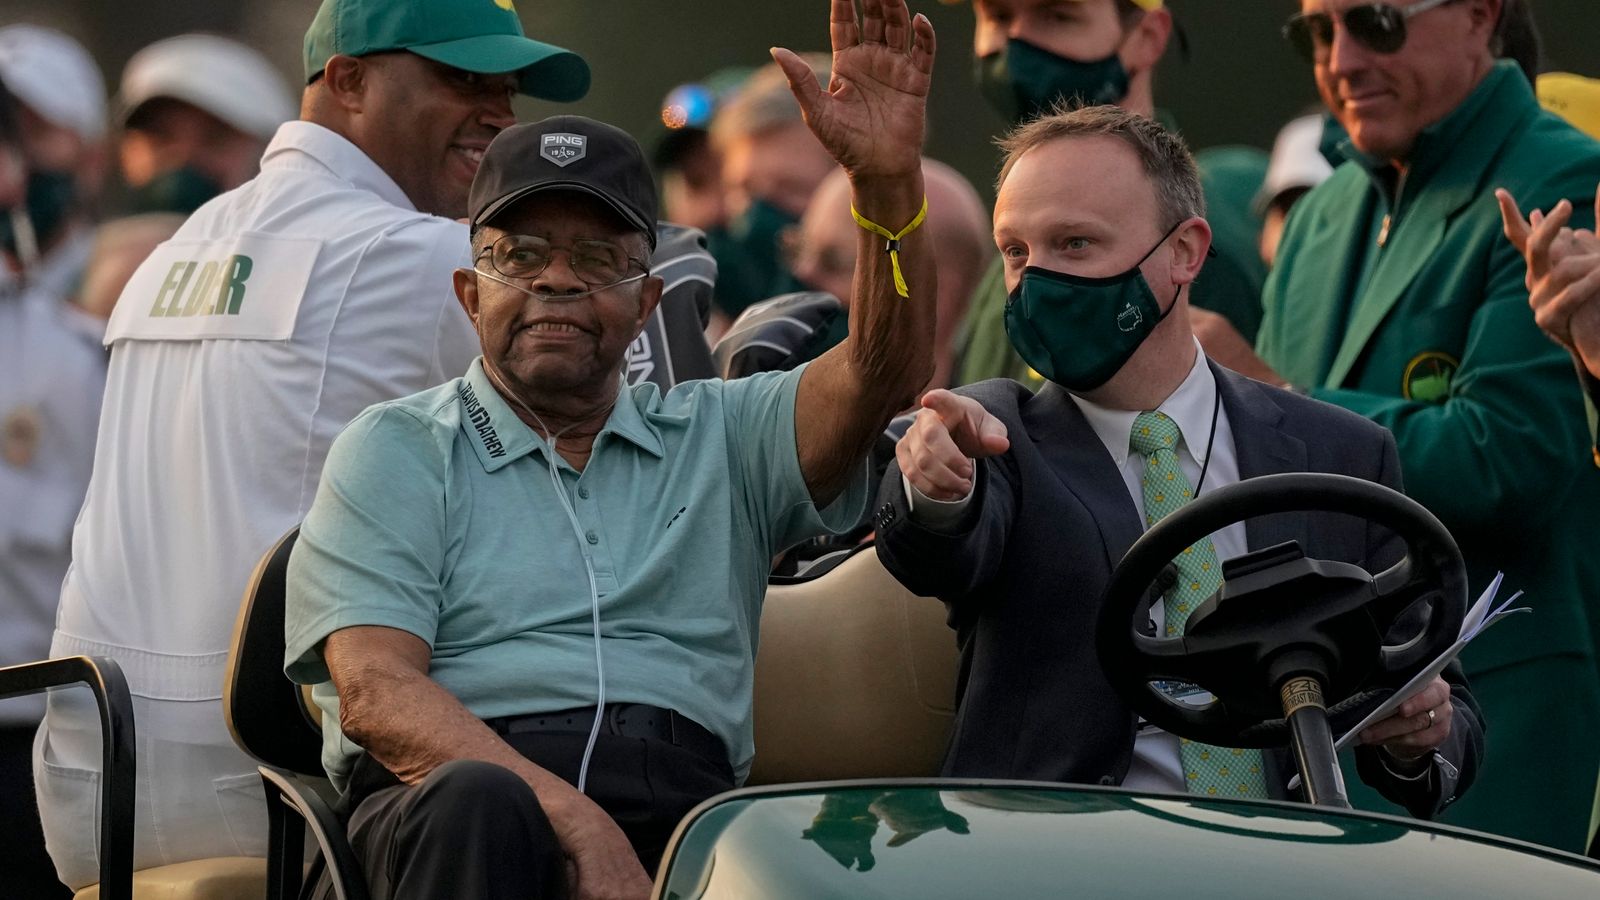 Lee Elder: First African American to play at The Masters dies aged 87